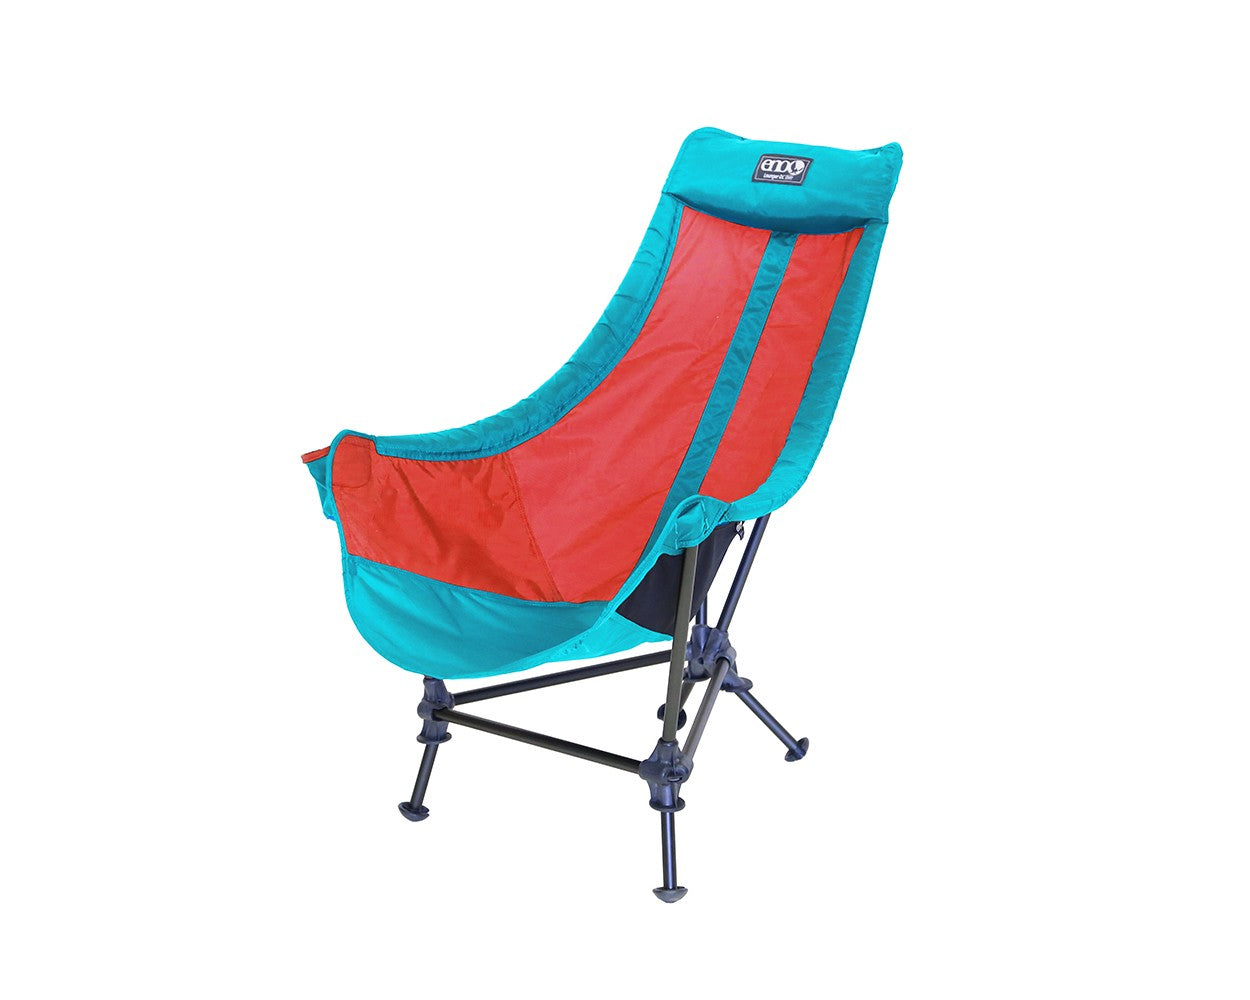 Eagles Nest Outfitters (ENO) Lounger DL Chair